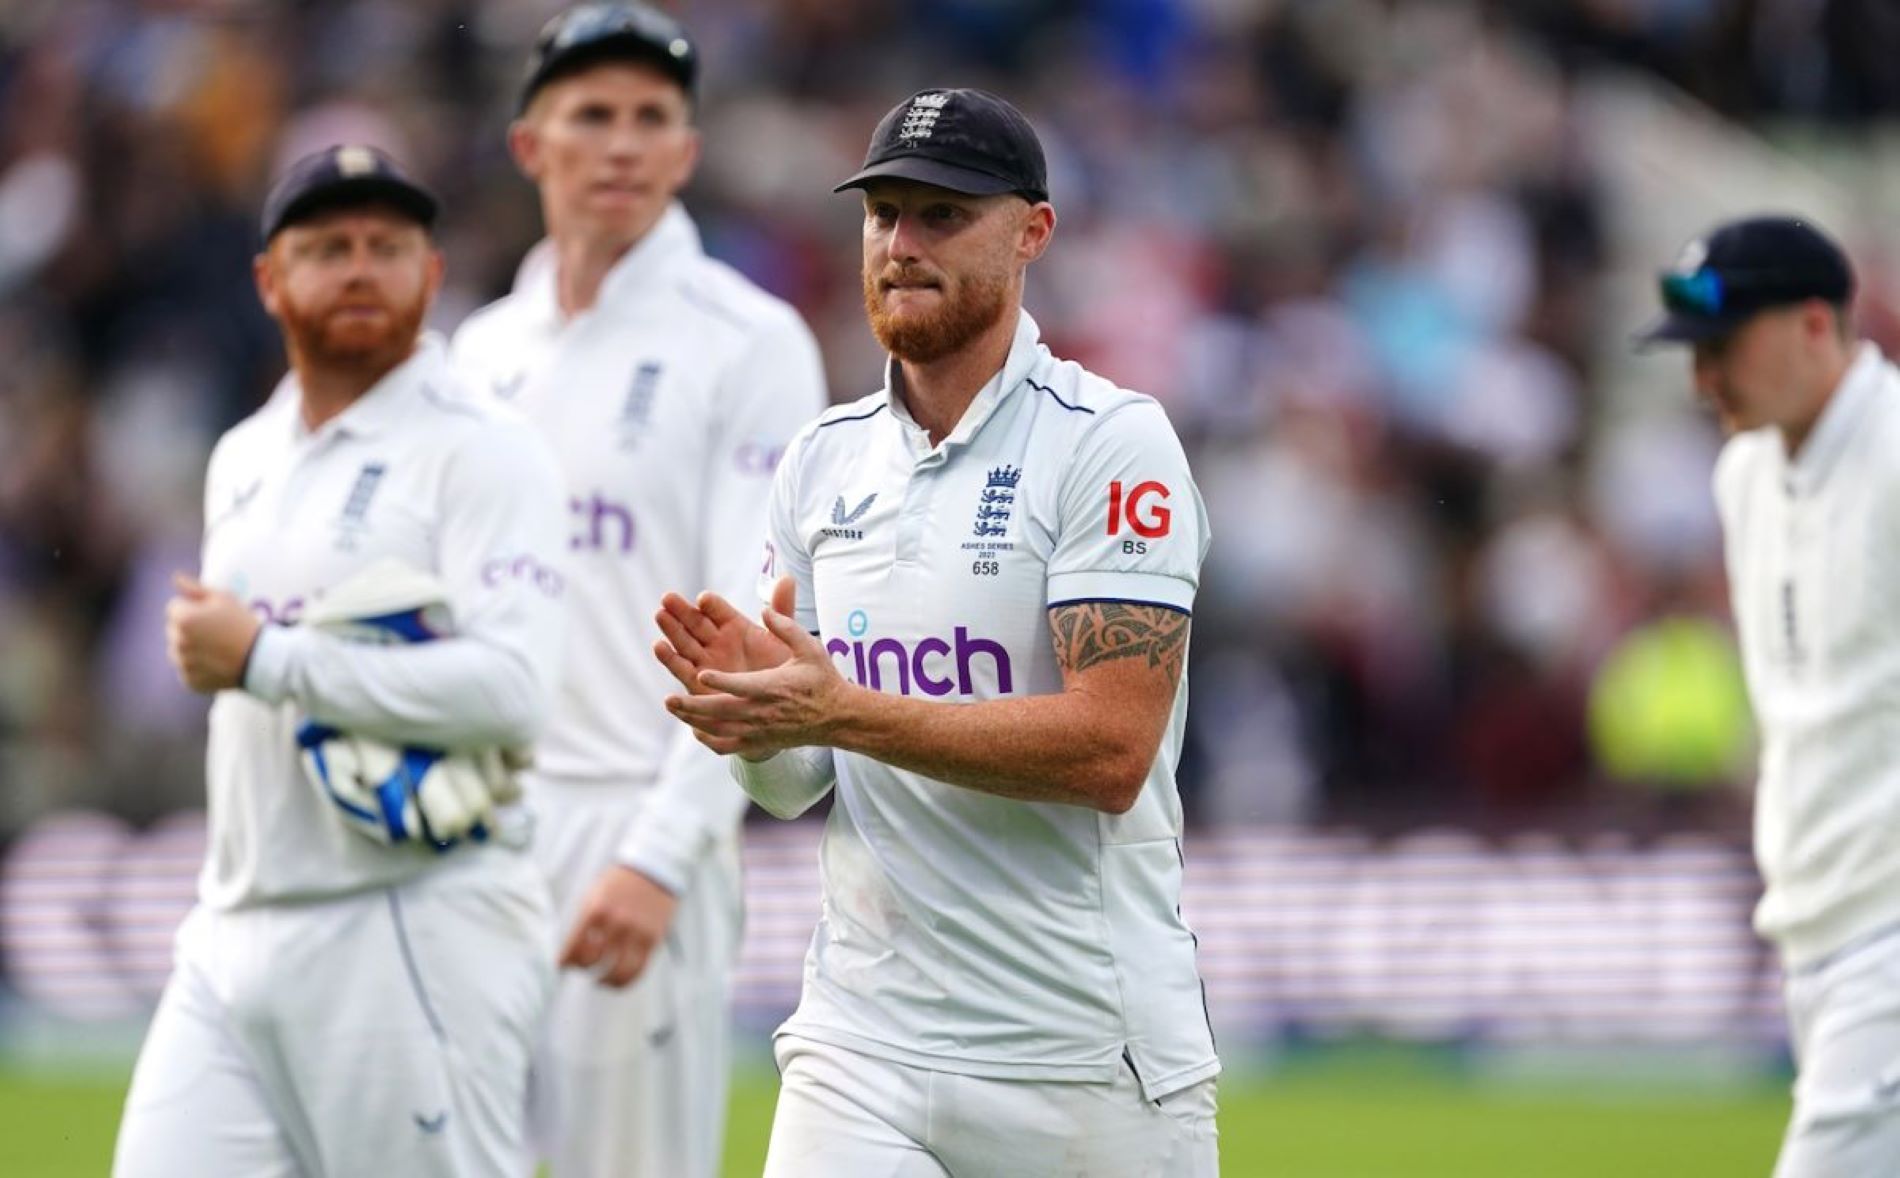 The England team walked away disappointed after losing a thrilling first Test.